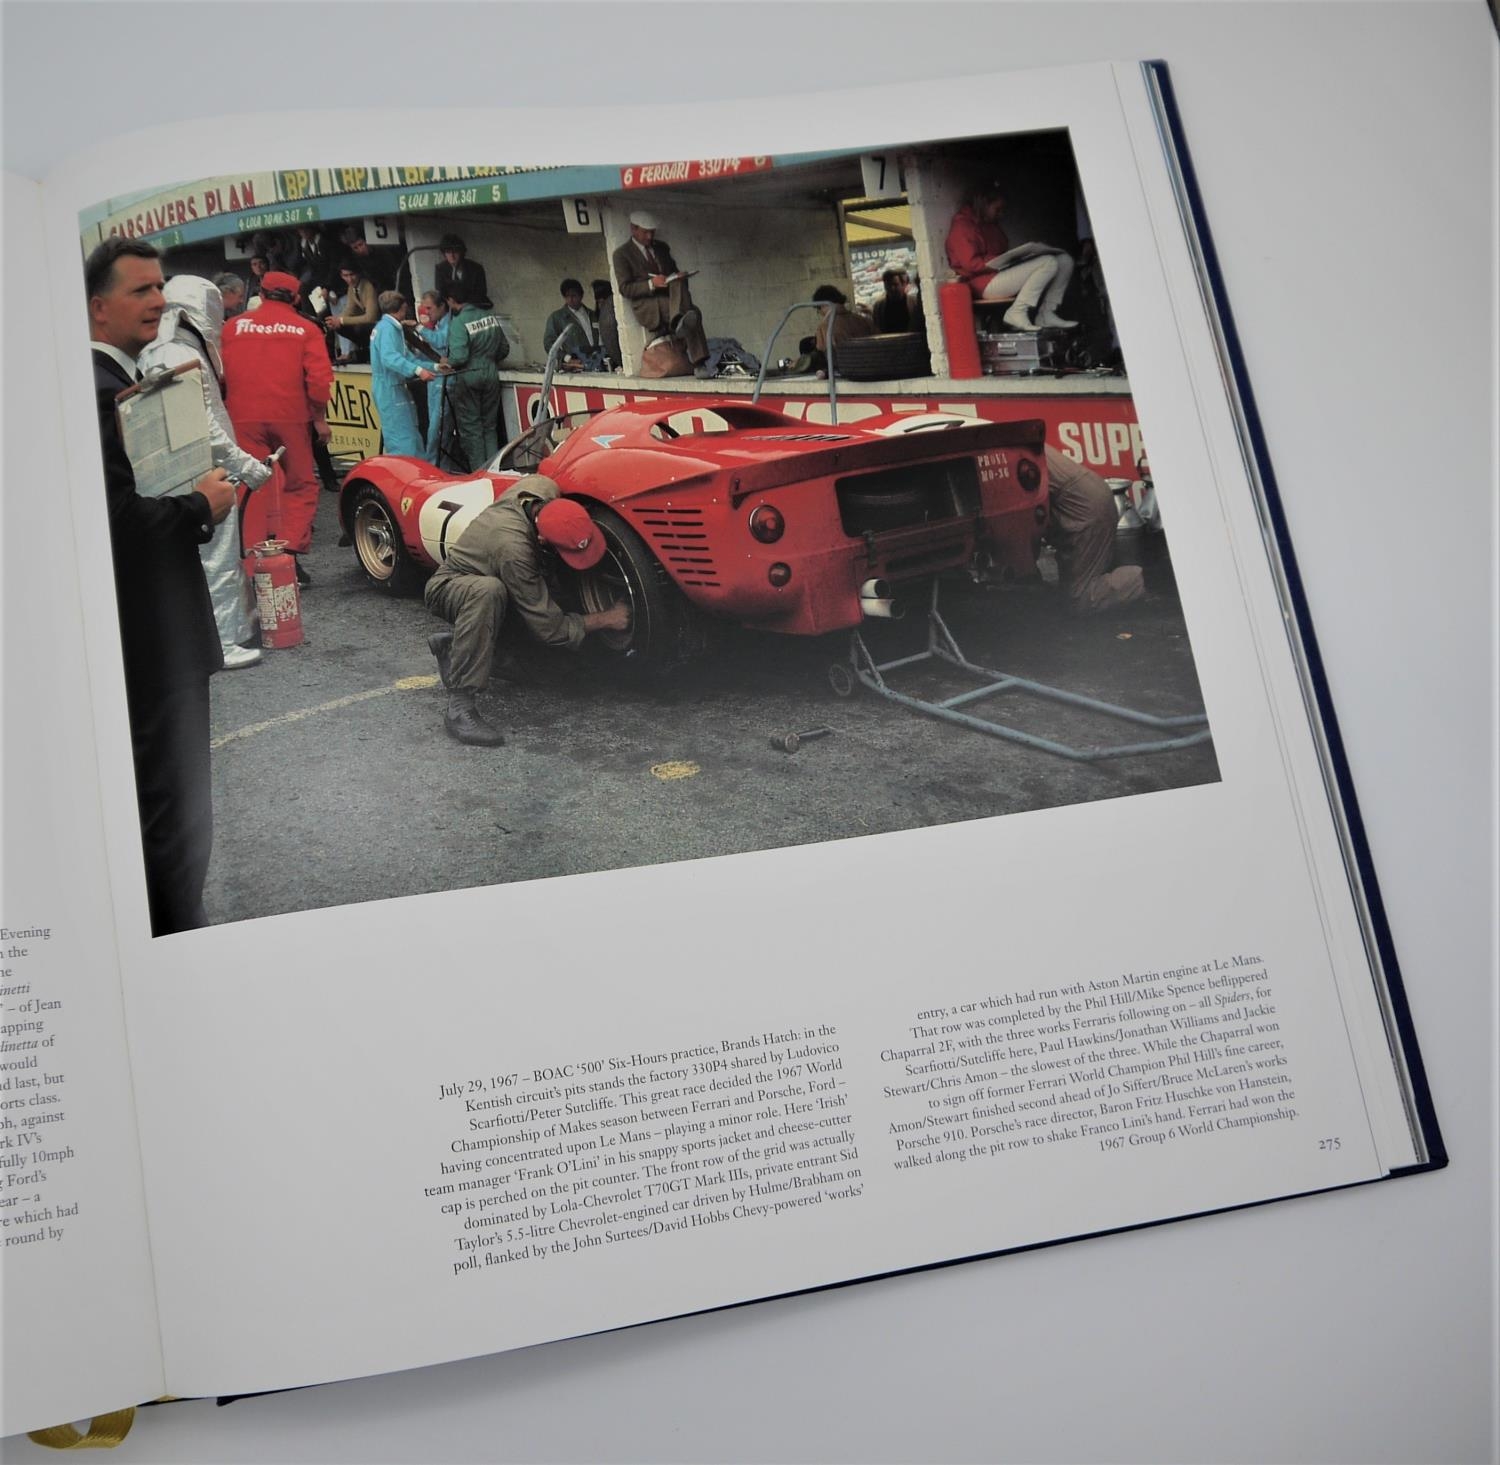 GEOFFREY GODDARD: FERRARI IN CAMERA FROM ASCARI TO VILLENEUVE limited edition copy 36 of 1000 of - Image 4 of 5